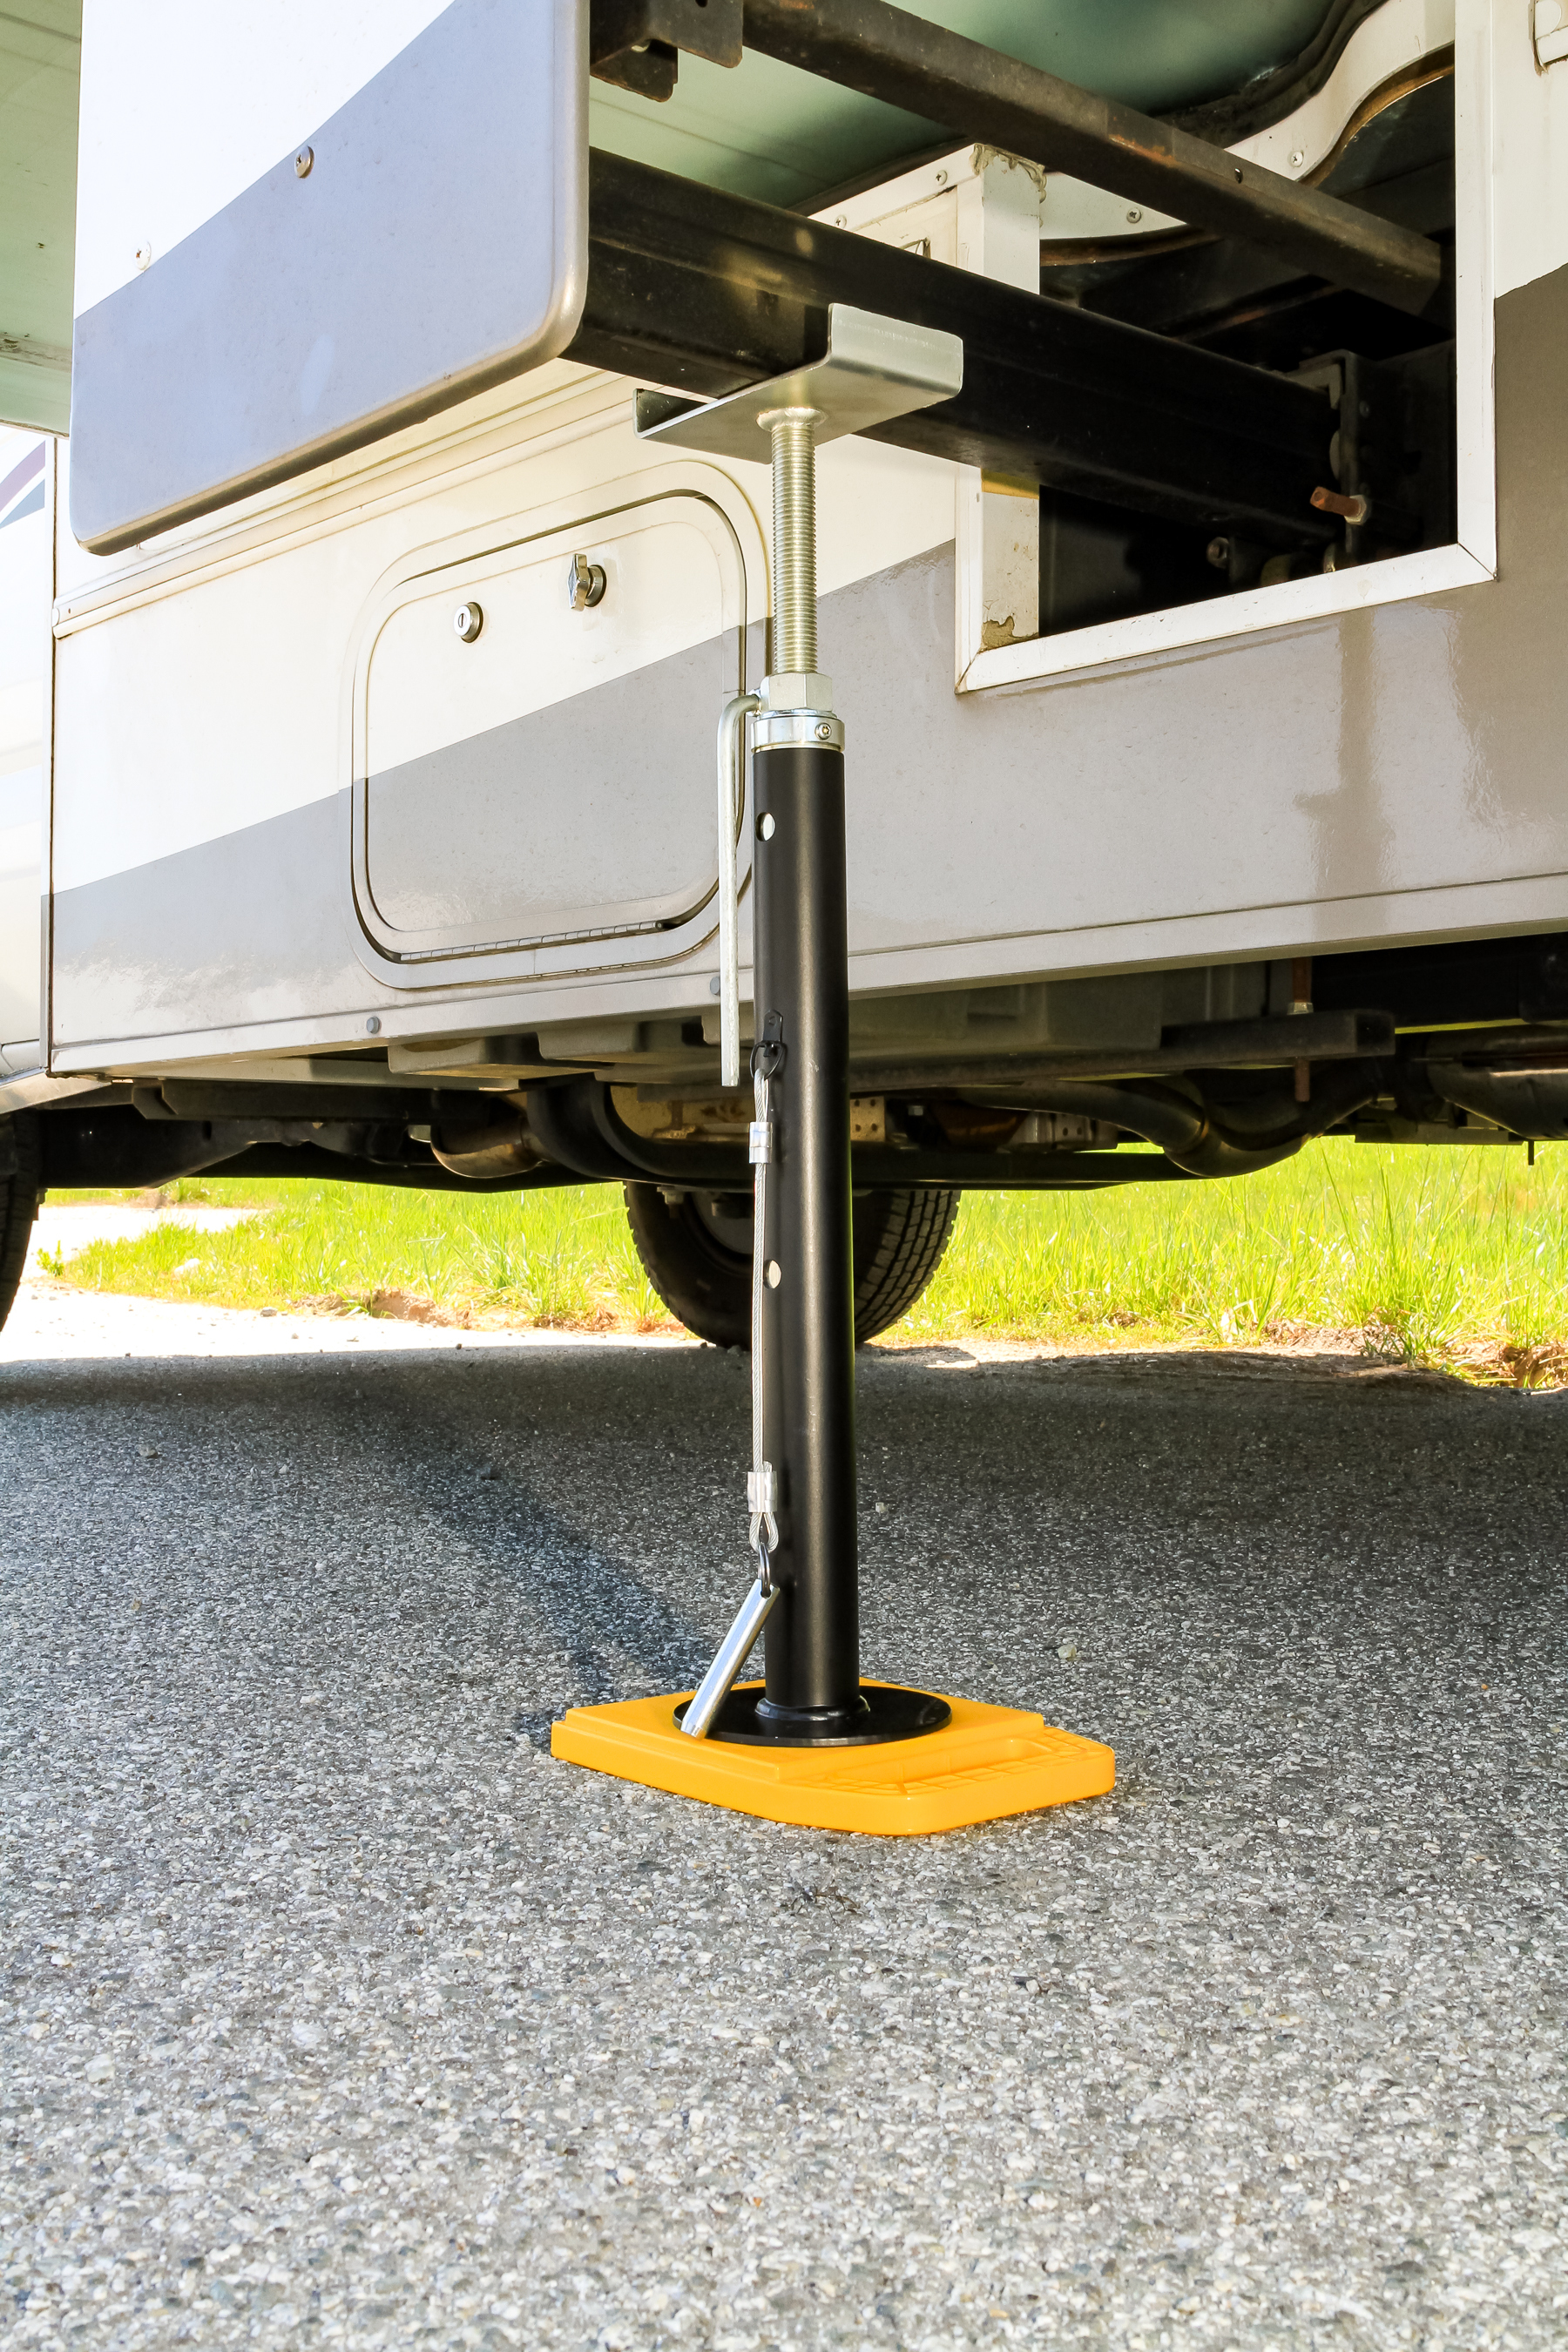 Camco Eaz-Lift Premium RV Slide-Out Support | Adjusts from 19 to 47-inches High | Holds up to 5,000 lbs. Each | Durable Steel, Black and Silver (48867) - image 7 of 9